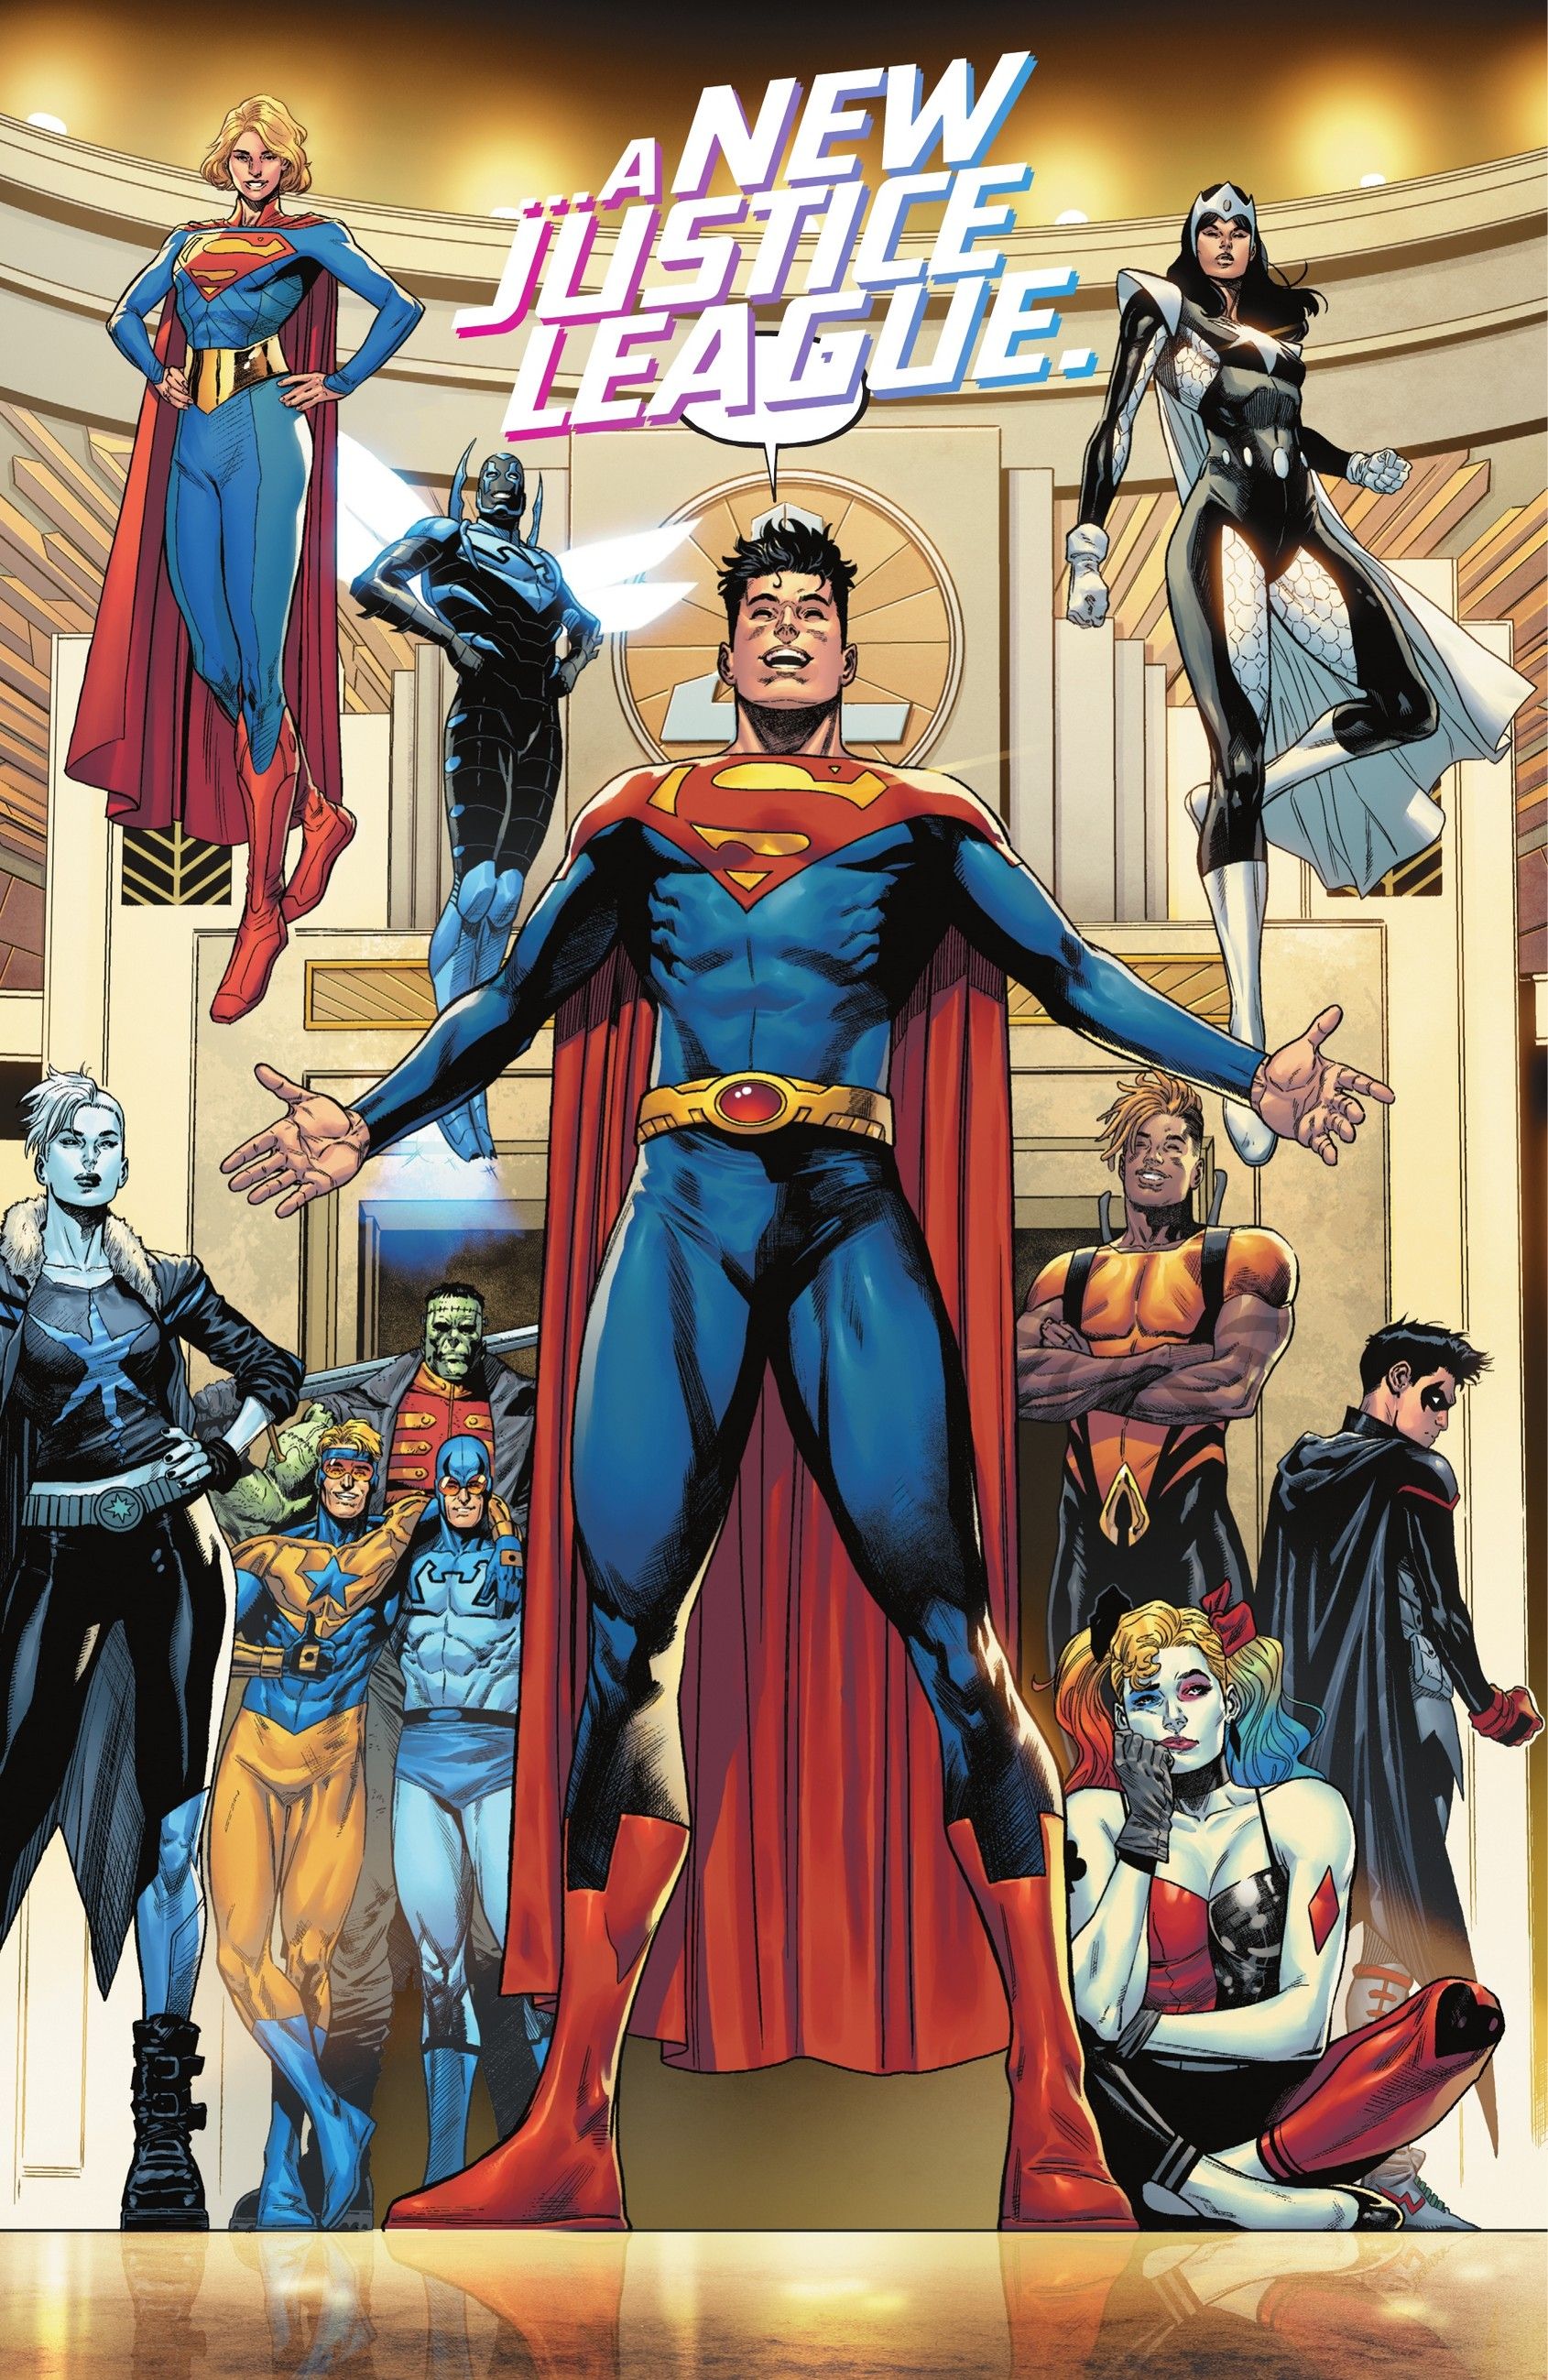 Supergirl shows off her sleek new costume alongside other members of Jon Kent's new Justice League, from Dark Crisis #1.